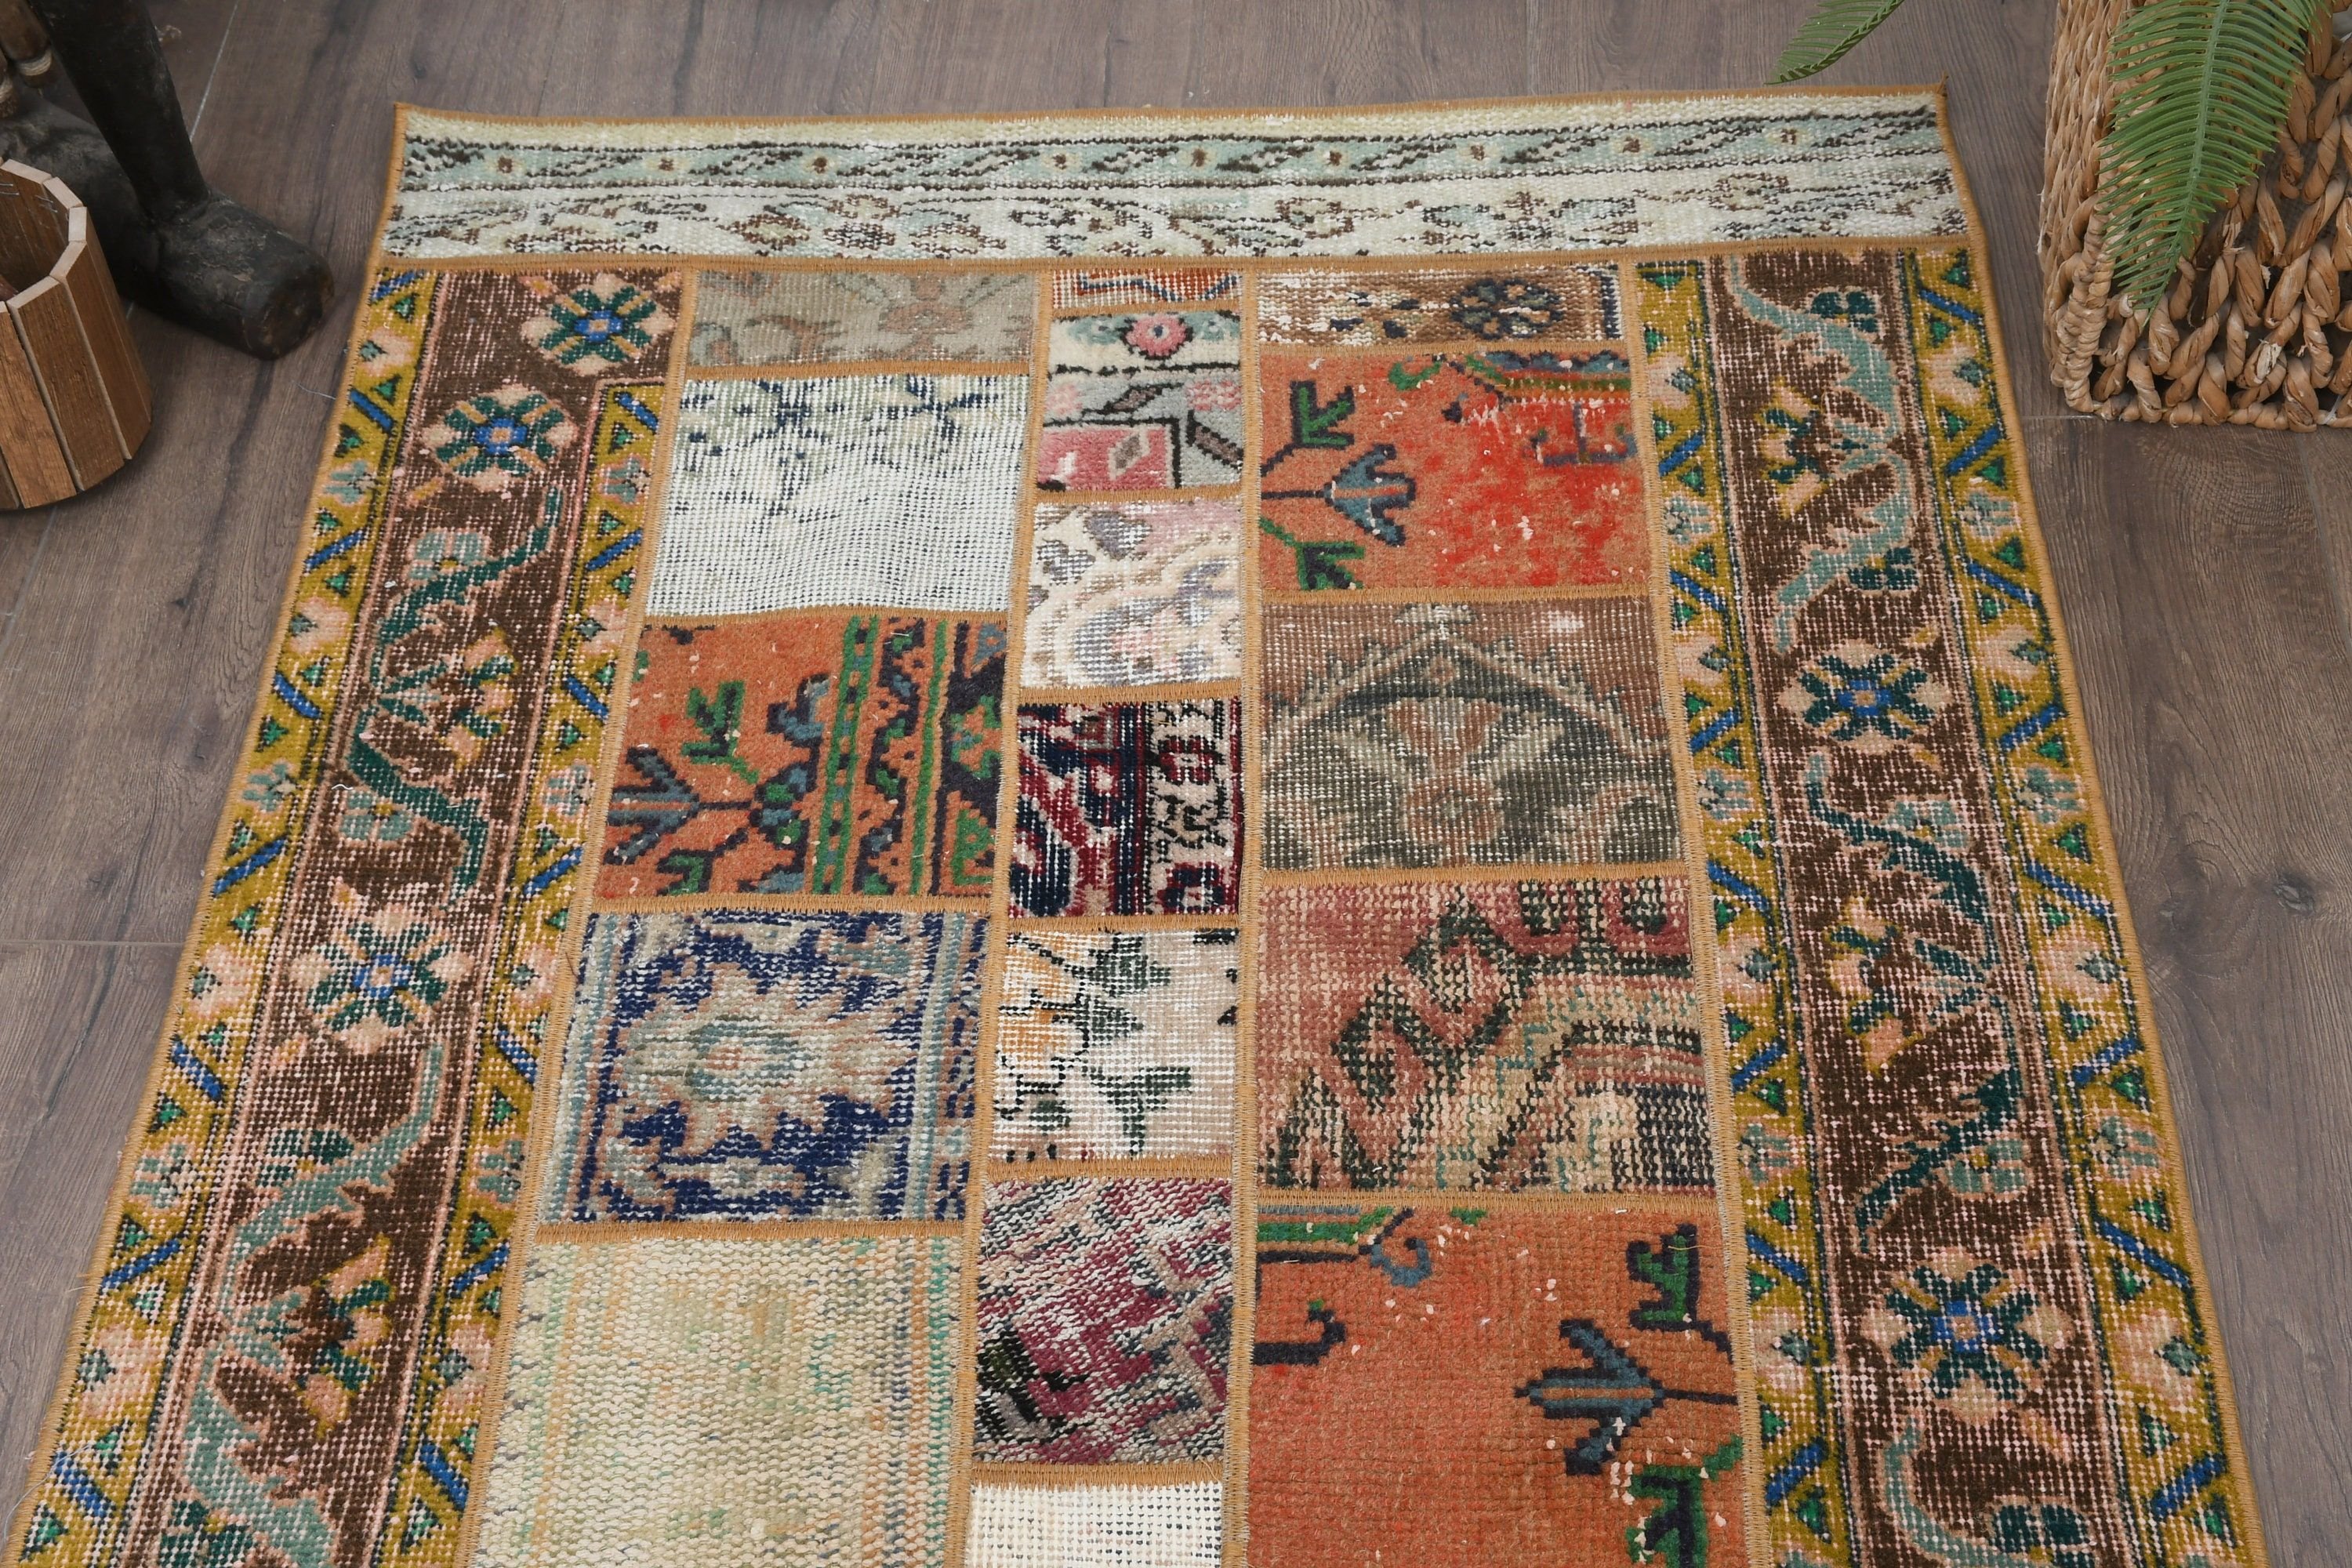 Bedroom Rug, Entry Rugs, Home Decor Rug, Vintage Rug, Anatolian Rugs, Dorm Rugs, Rainbow Antique Rug, 2.9x6.8 ft Accent Rugs, Turkish Rugs